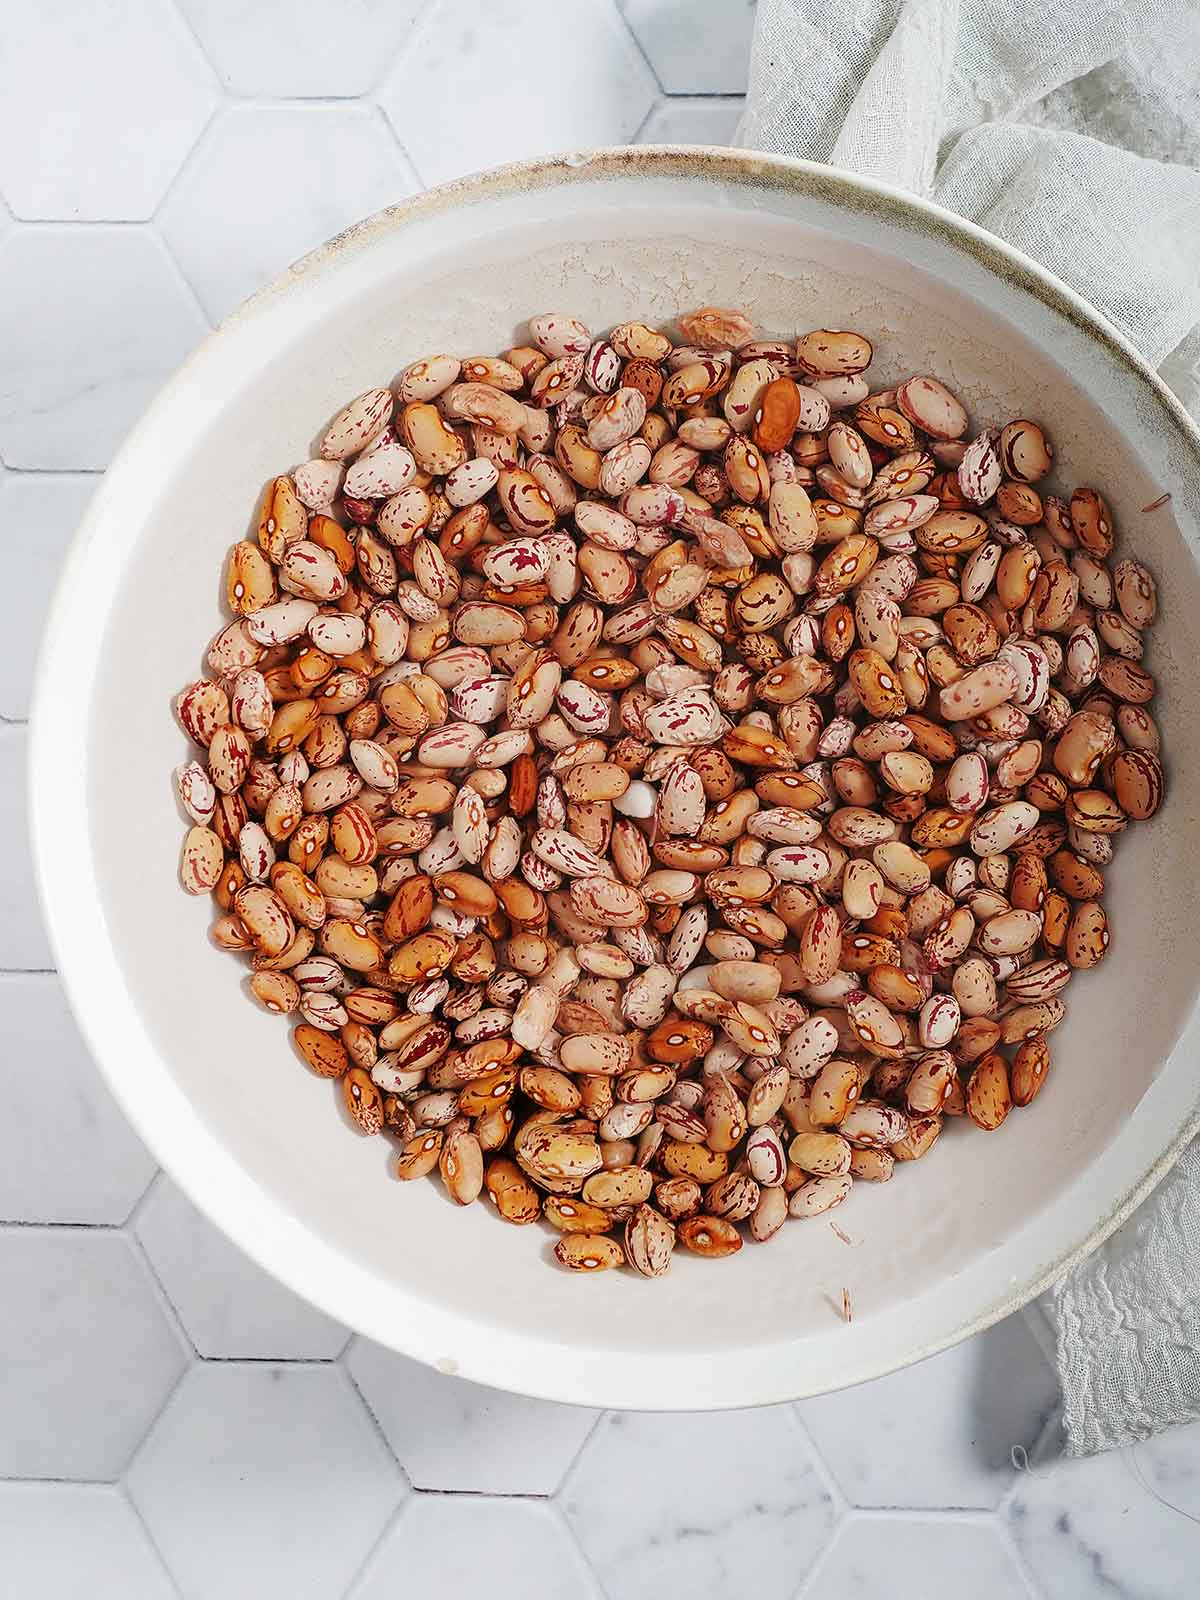 Soaking beans with water in a large bowl.